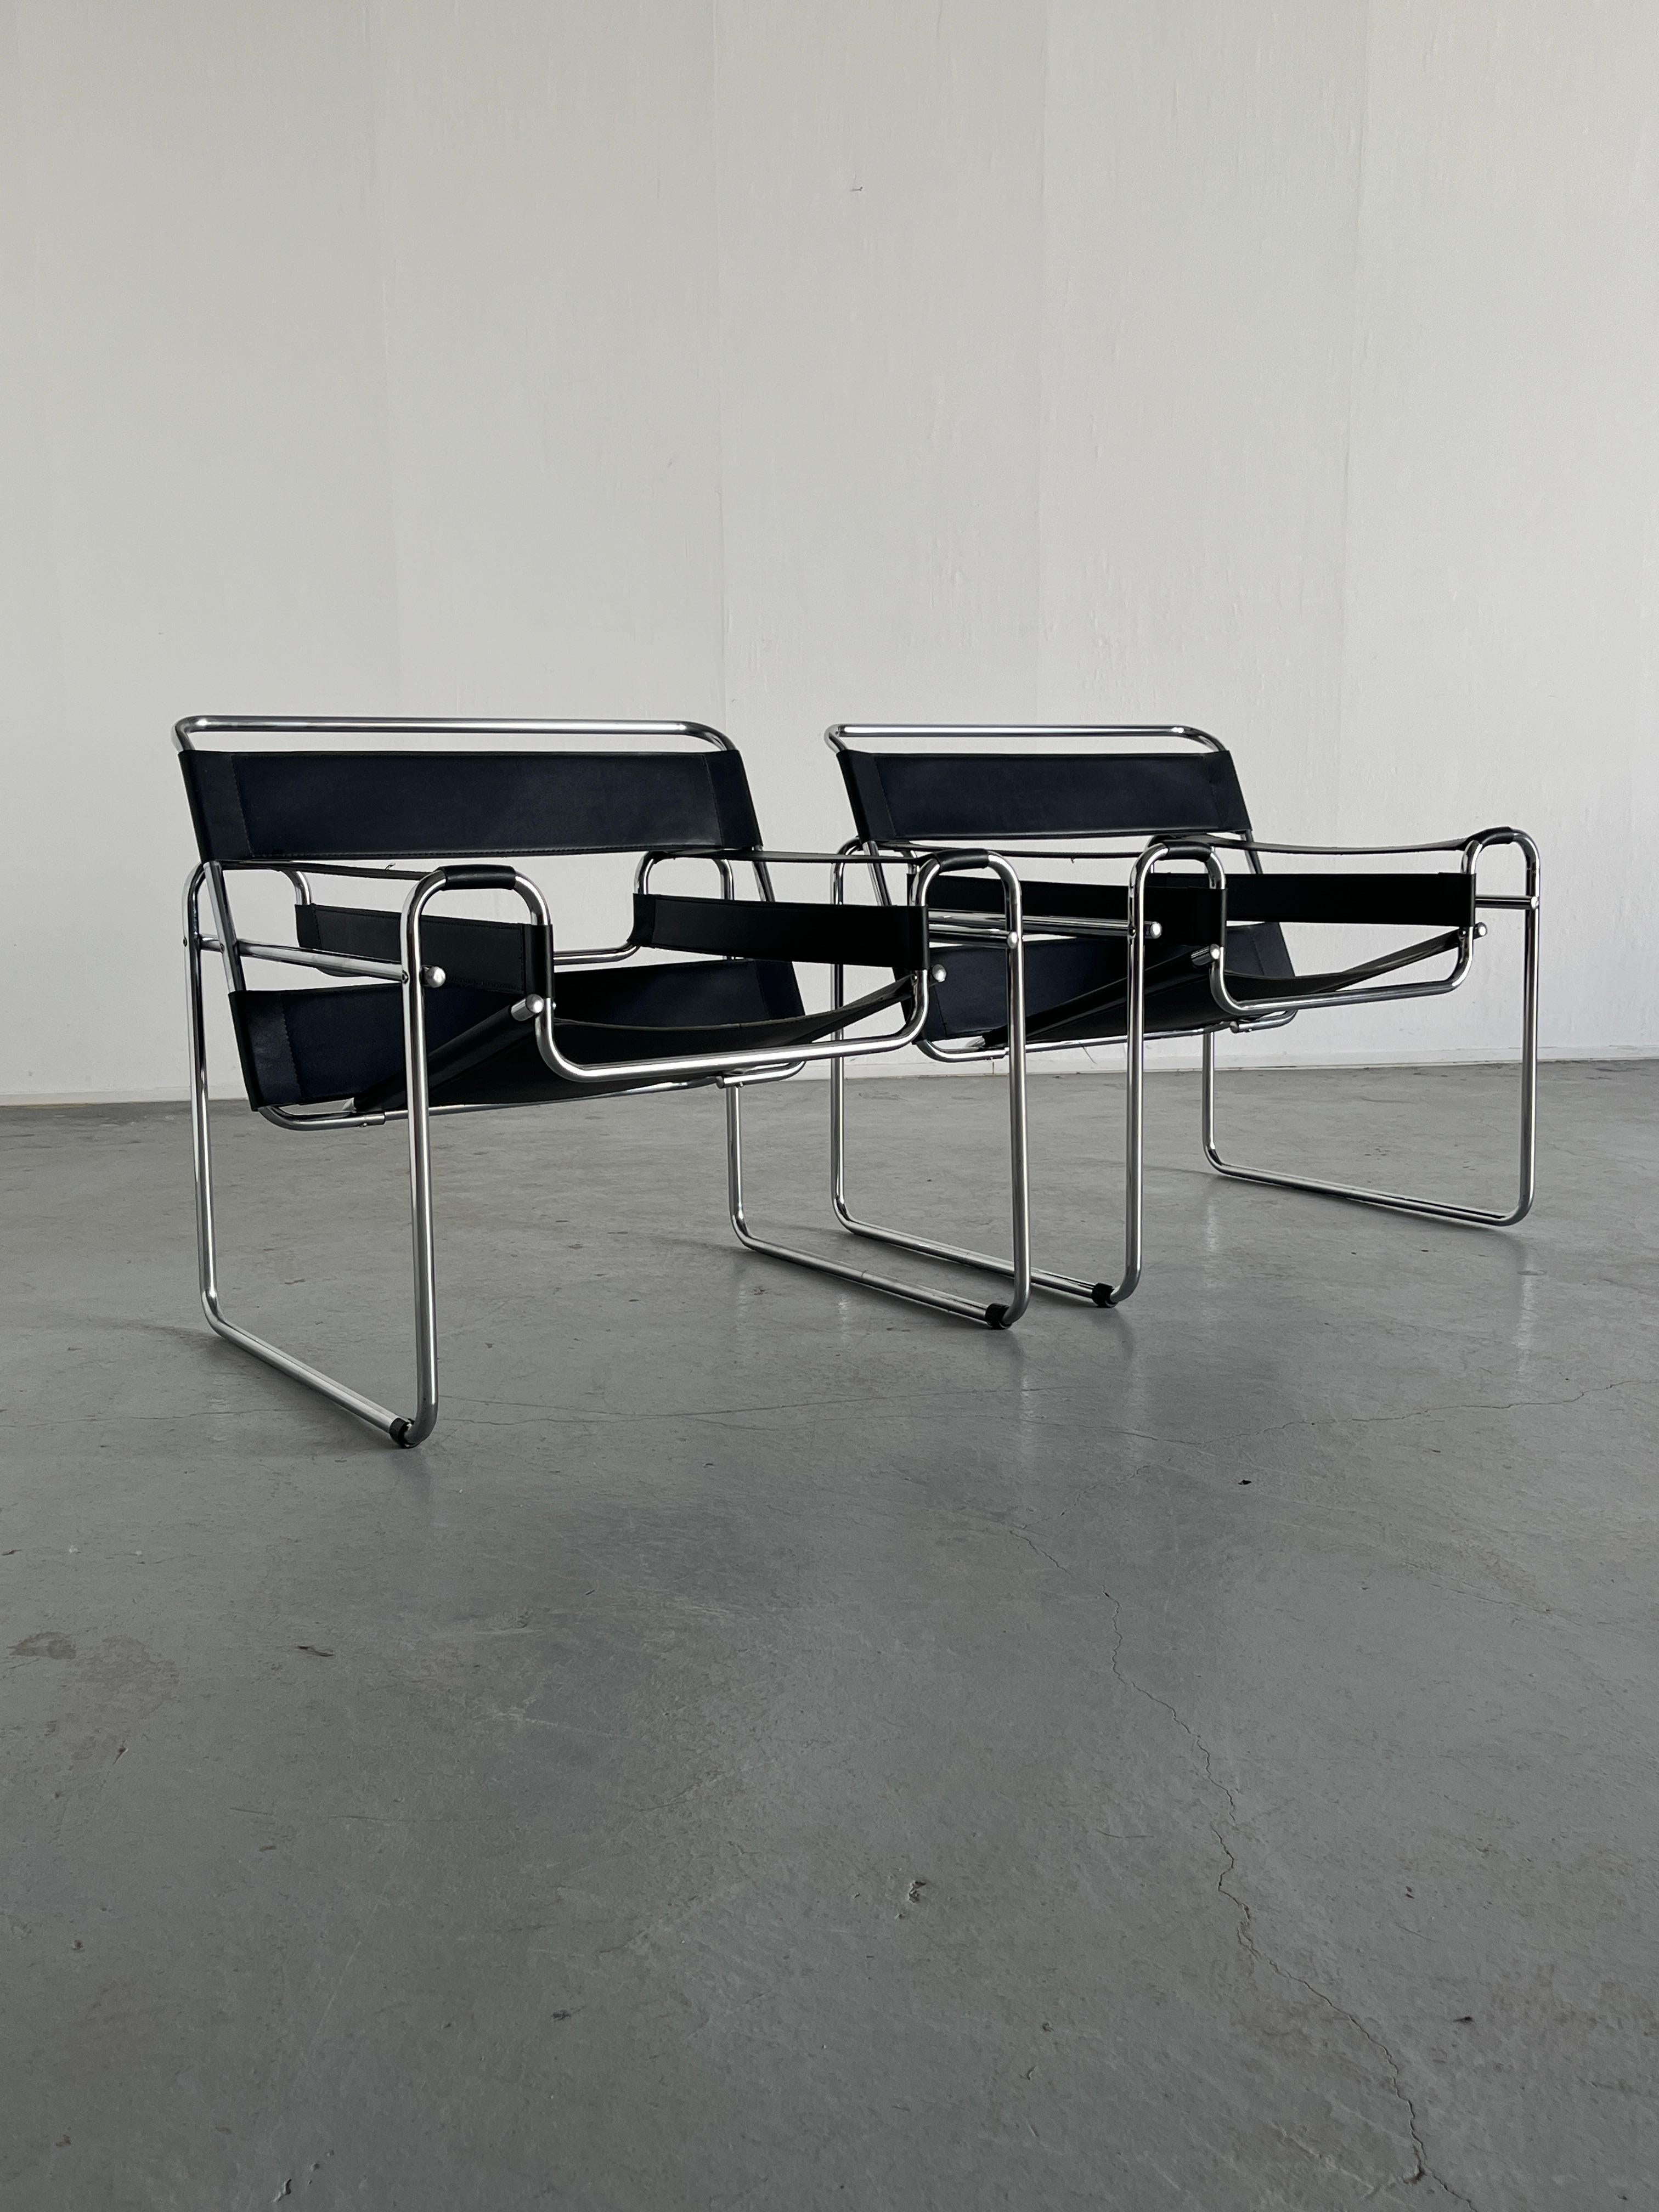 Two iconic Wassily armchairs designed by Marcel Breuer in 1925/26, also known as the 'B3' chair.
Unknown but quality vintage Italian production, circa 1970s.

Made from thick faux leather and chrome.

Overall in good vintage condition with some